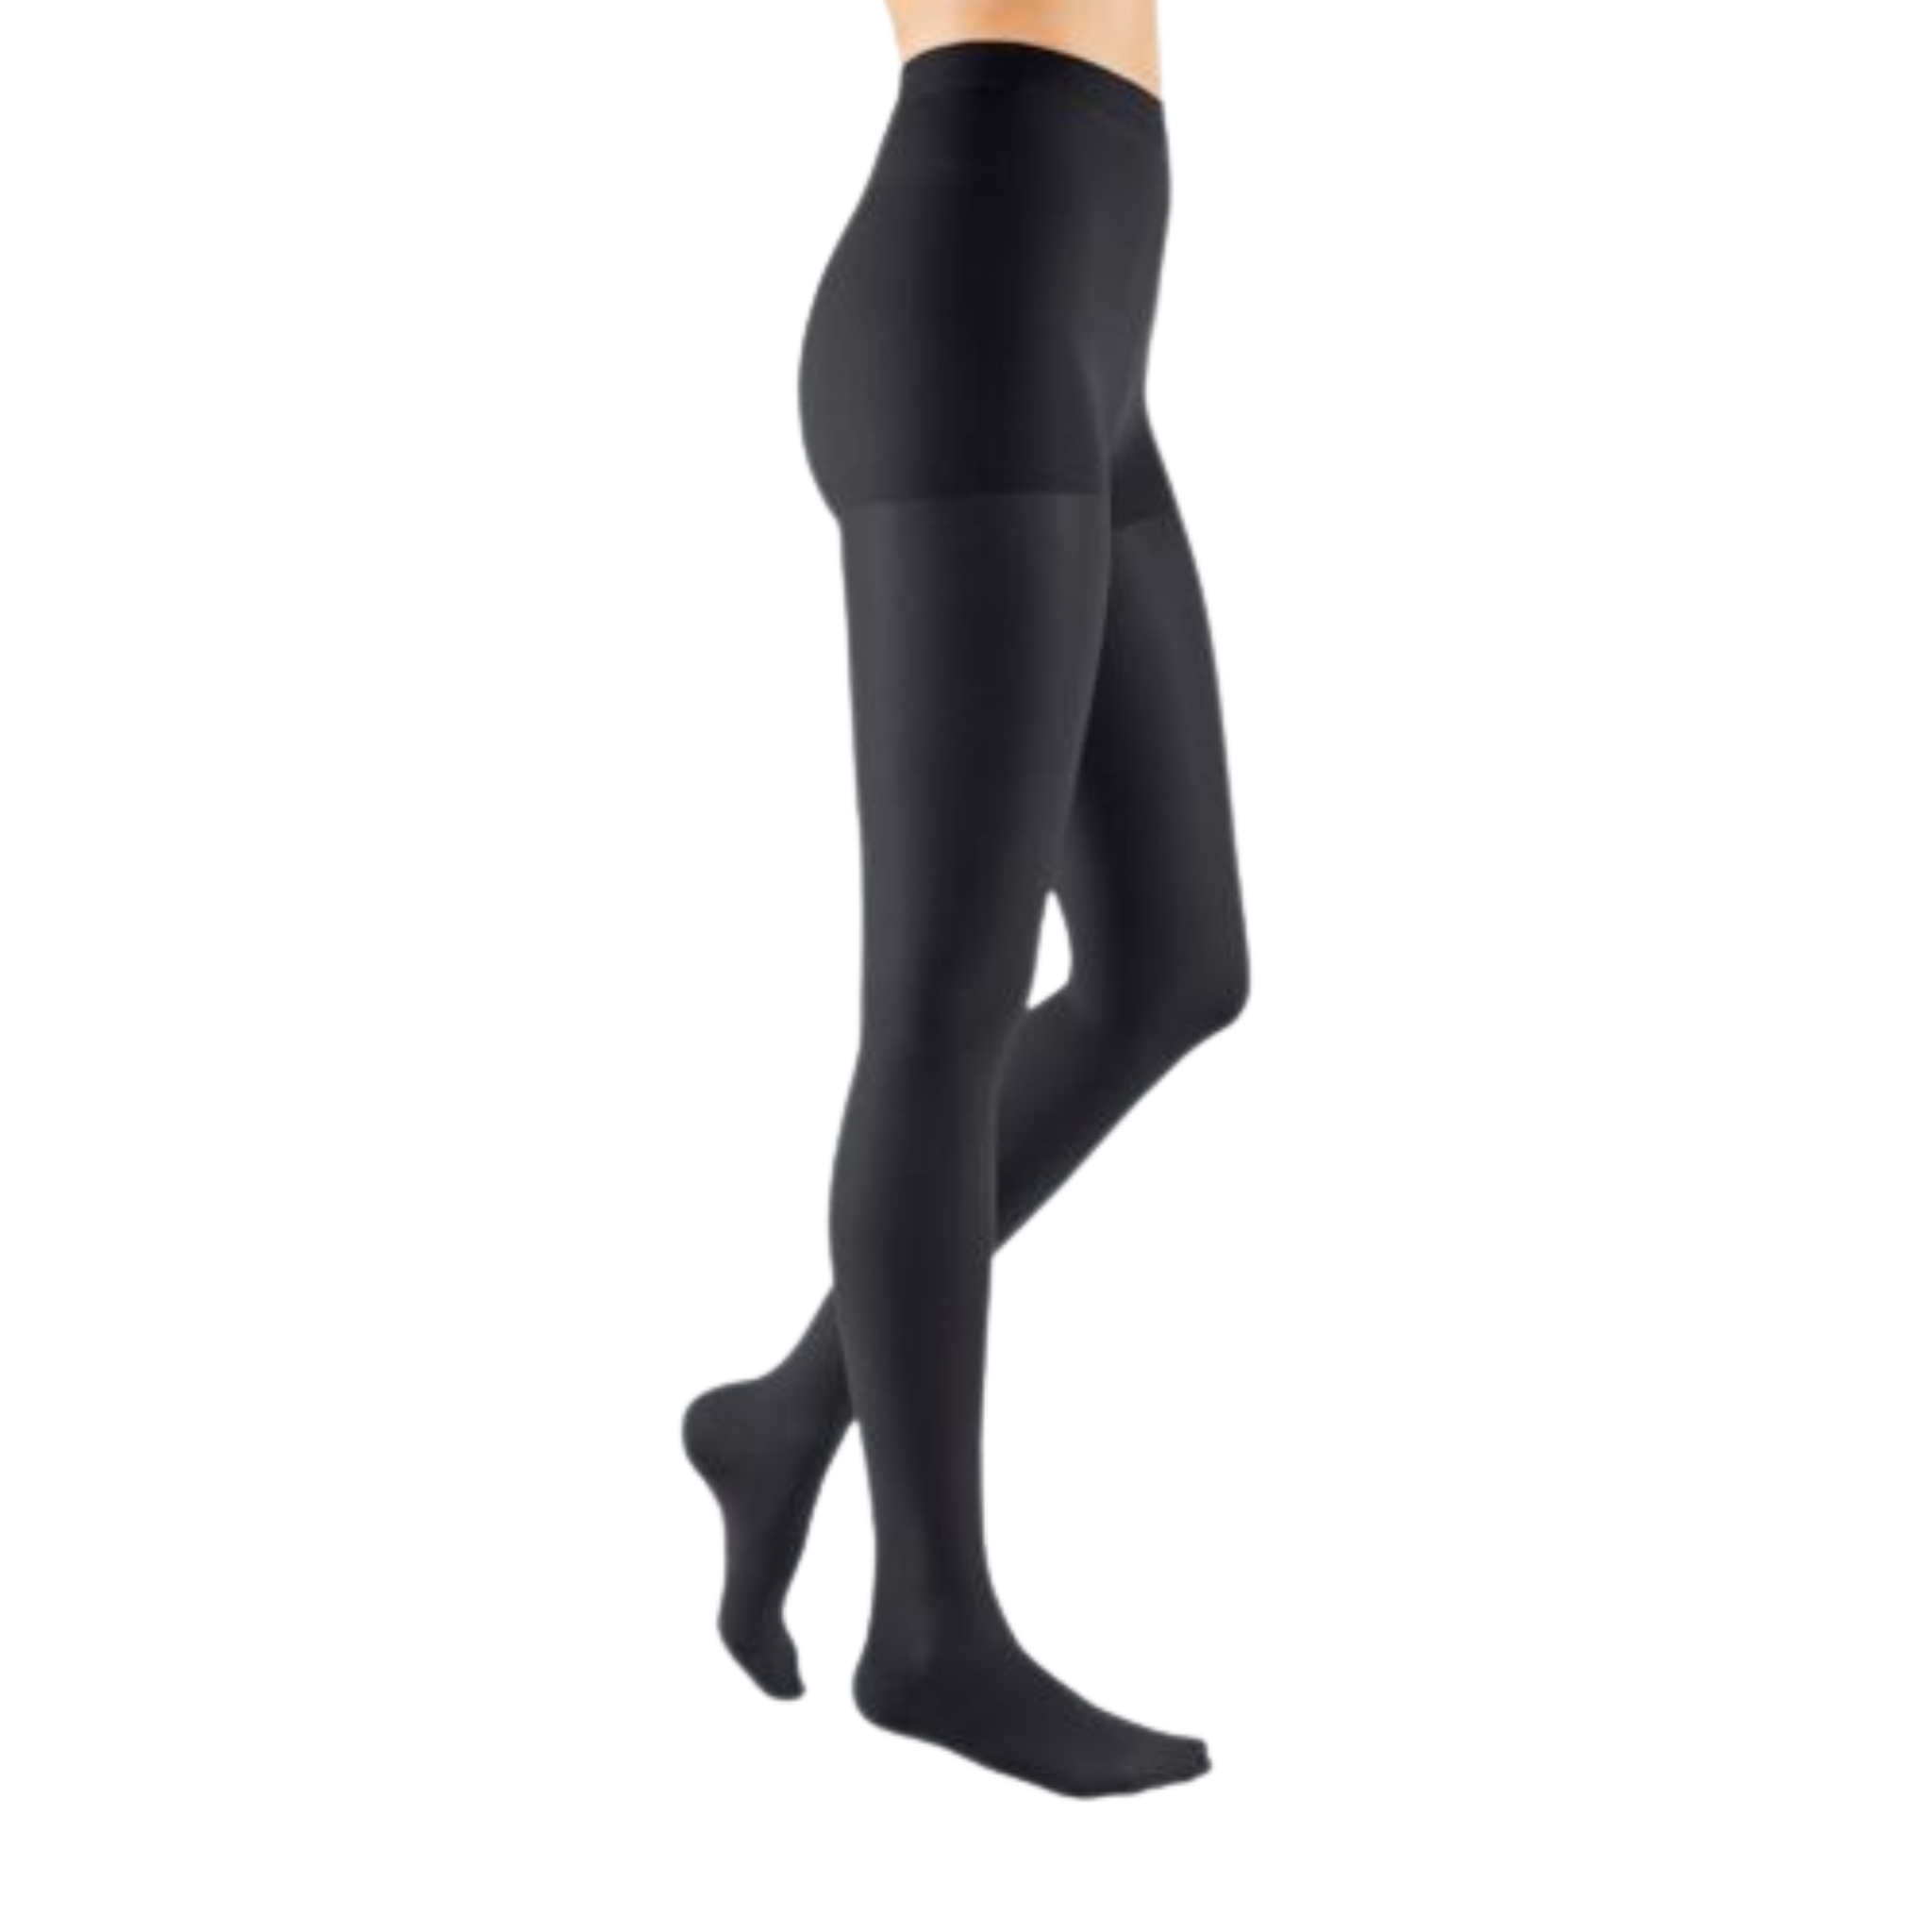 Compression Stockings, Knee High, Closed Toe, Anthracite